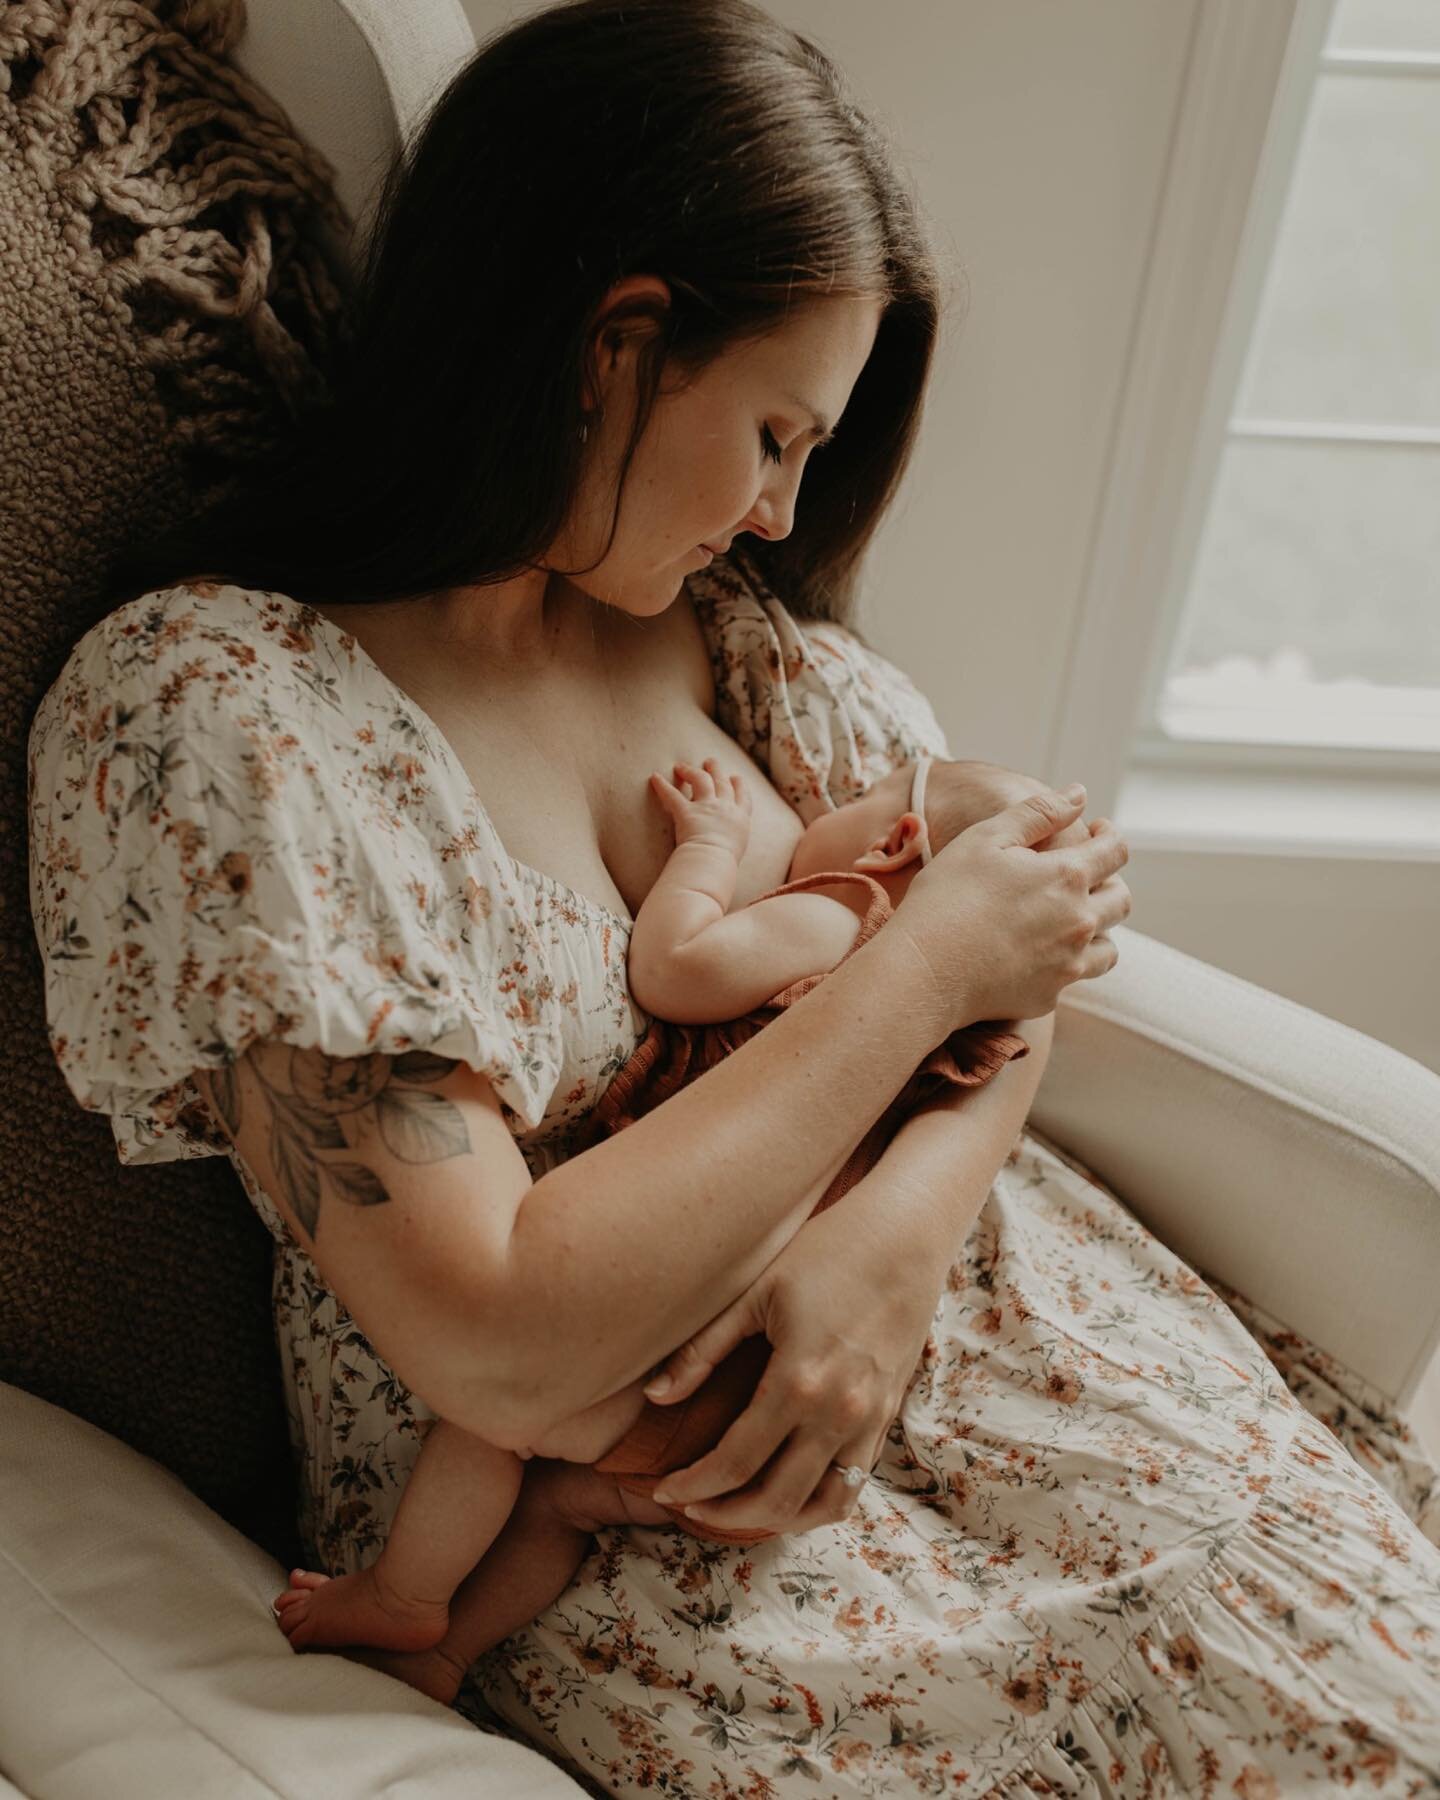 It&rsquo;s World Breastfeeding Week! What an incredible gift to be able to sustain our sweet babies in this way. 🥹 it certainly isn&rsquo;t easy, but it&rsquo;s an honor and such a beautiful bond.